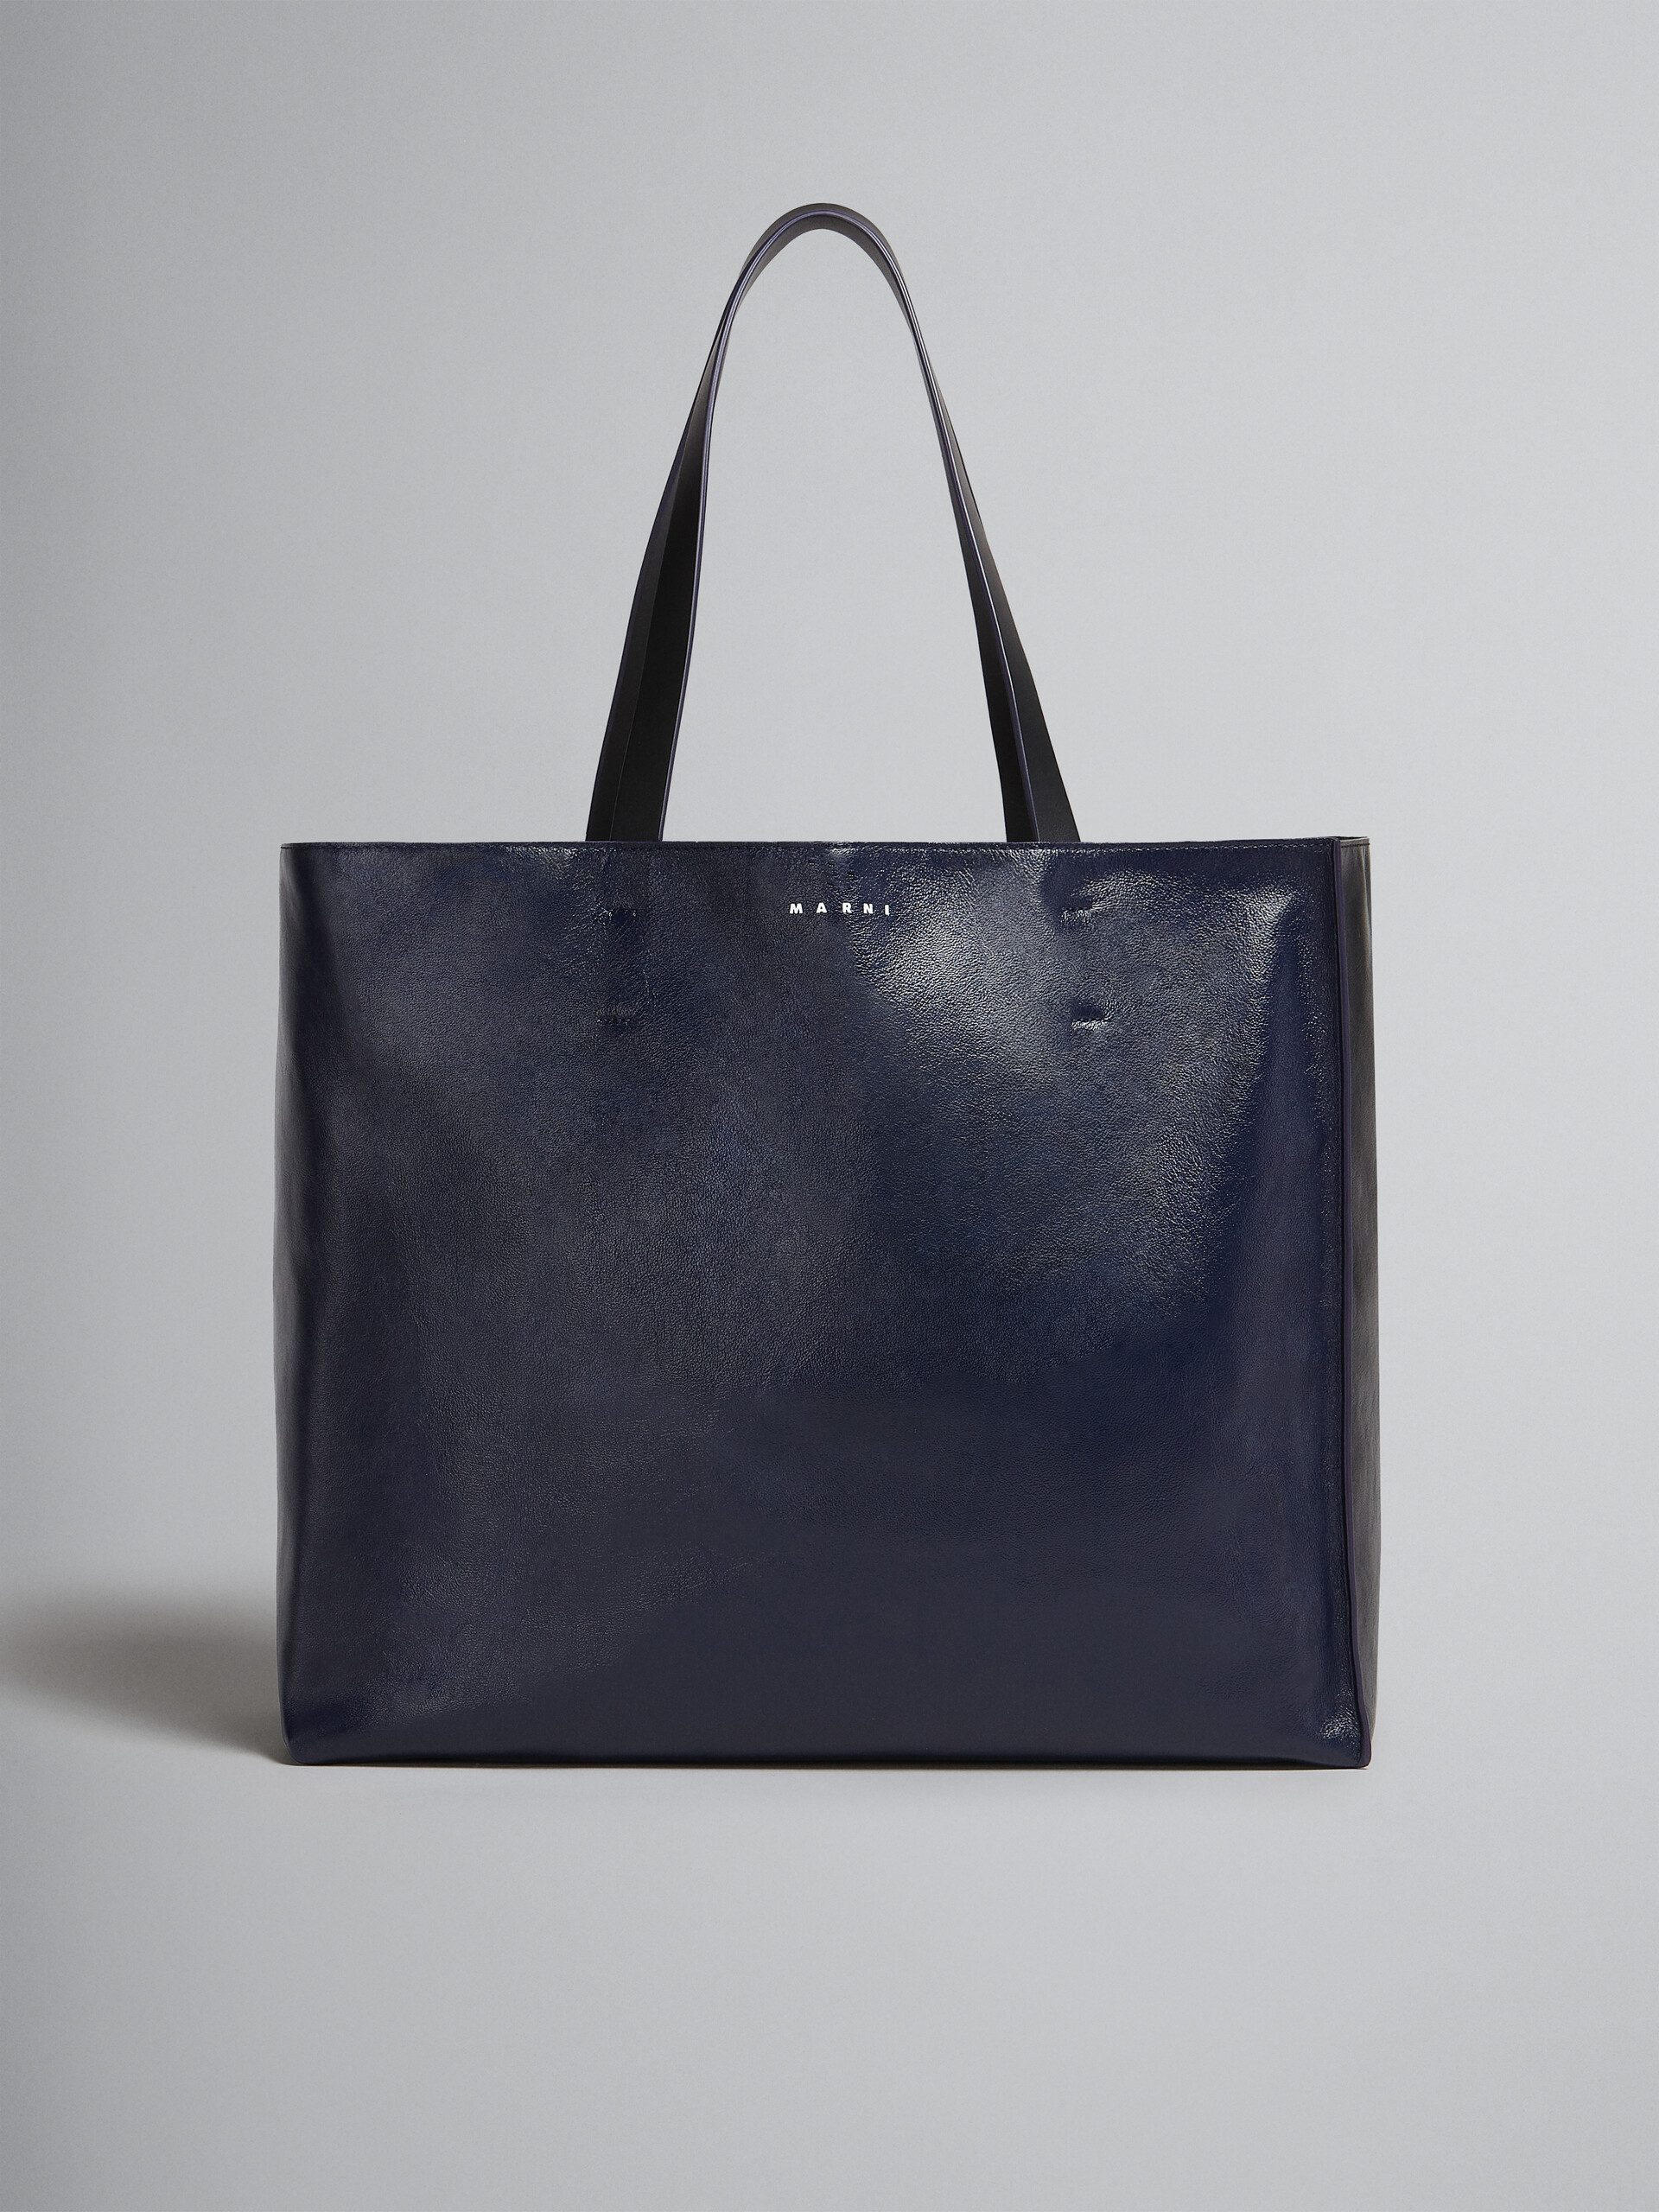 Museo Soft Bag in blue and black leather - Shopping Bags - Image 1